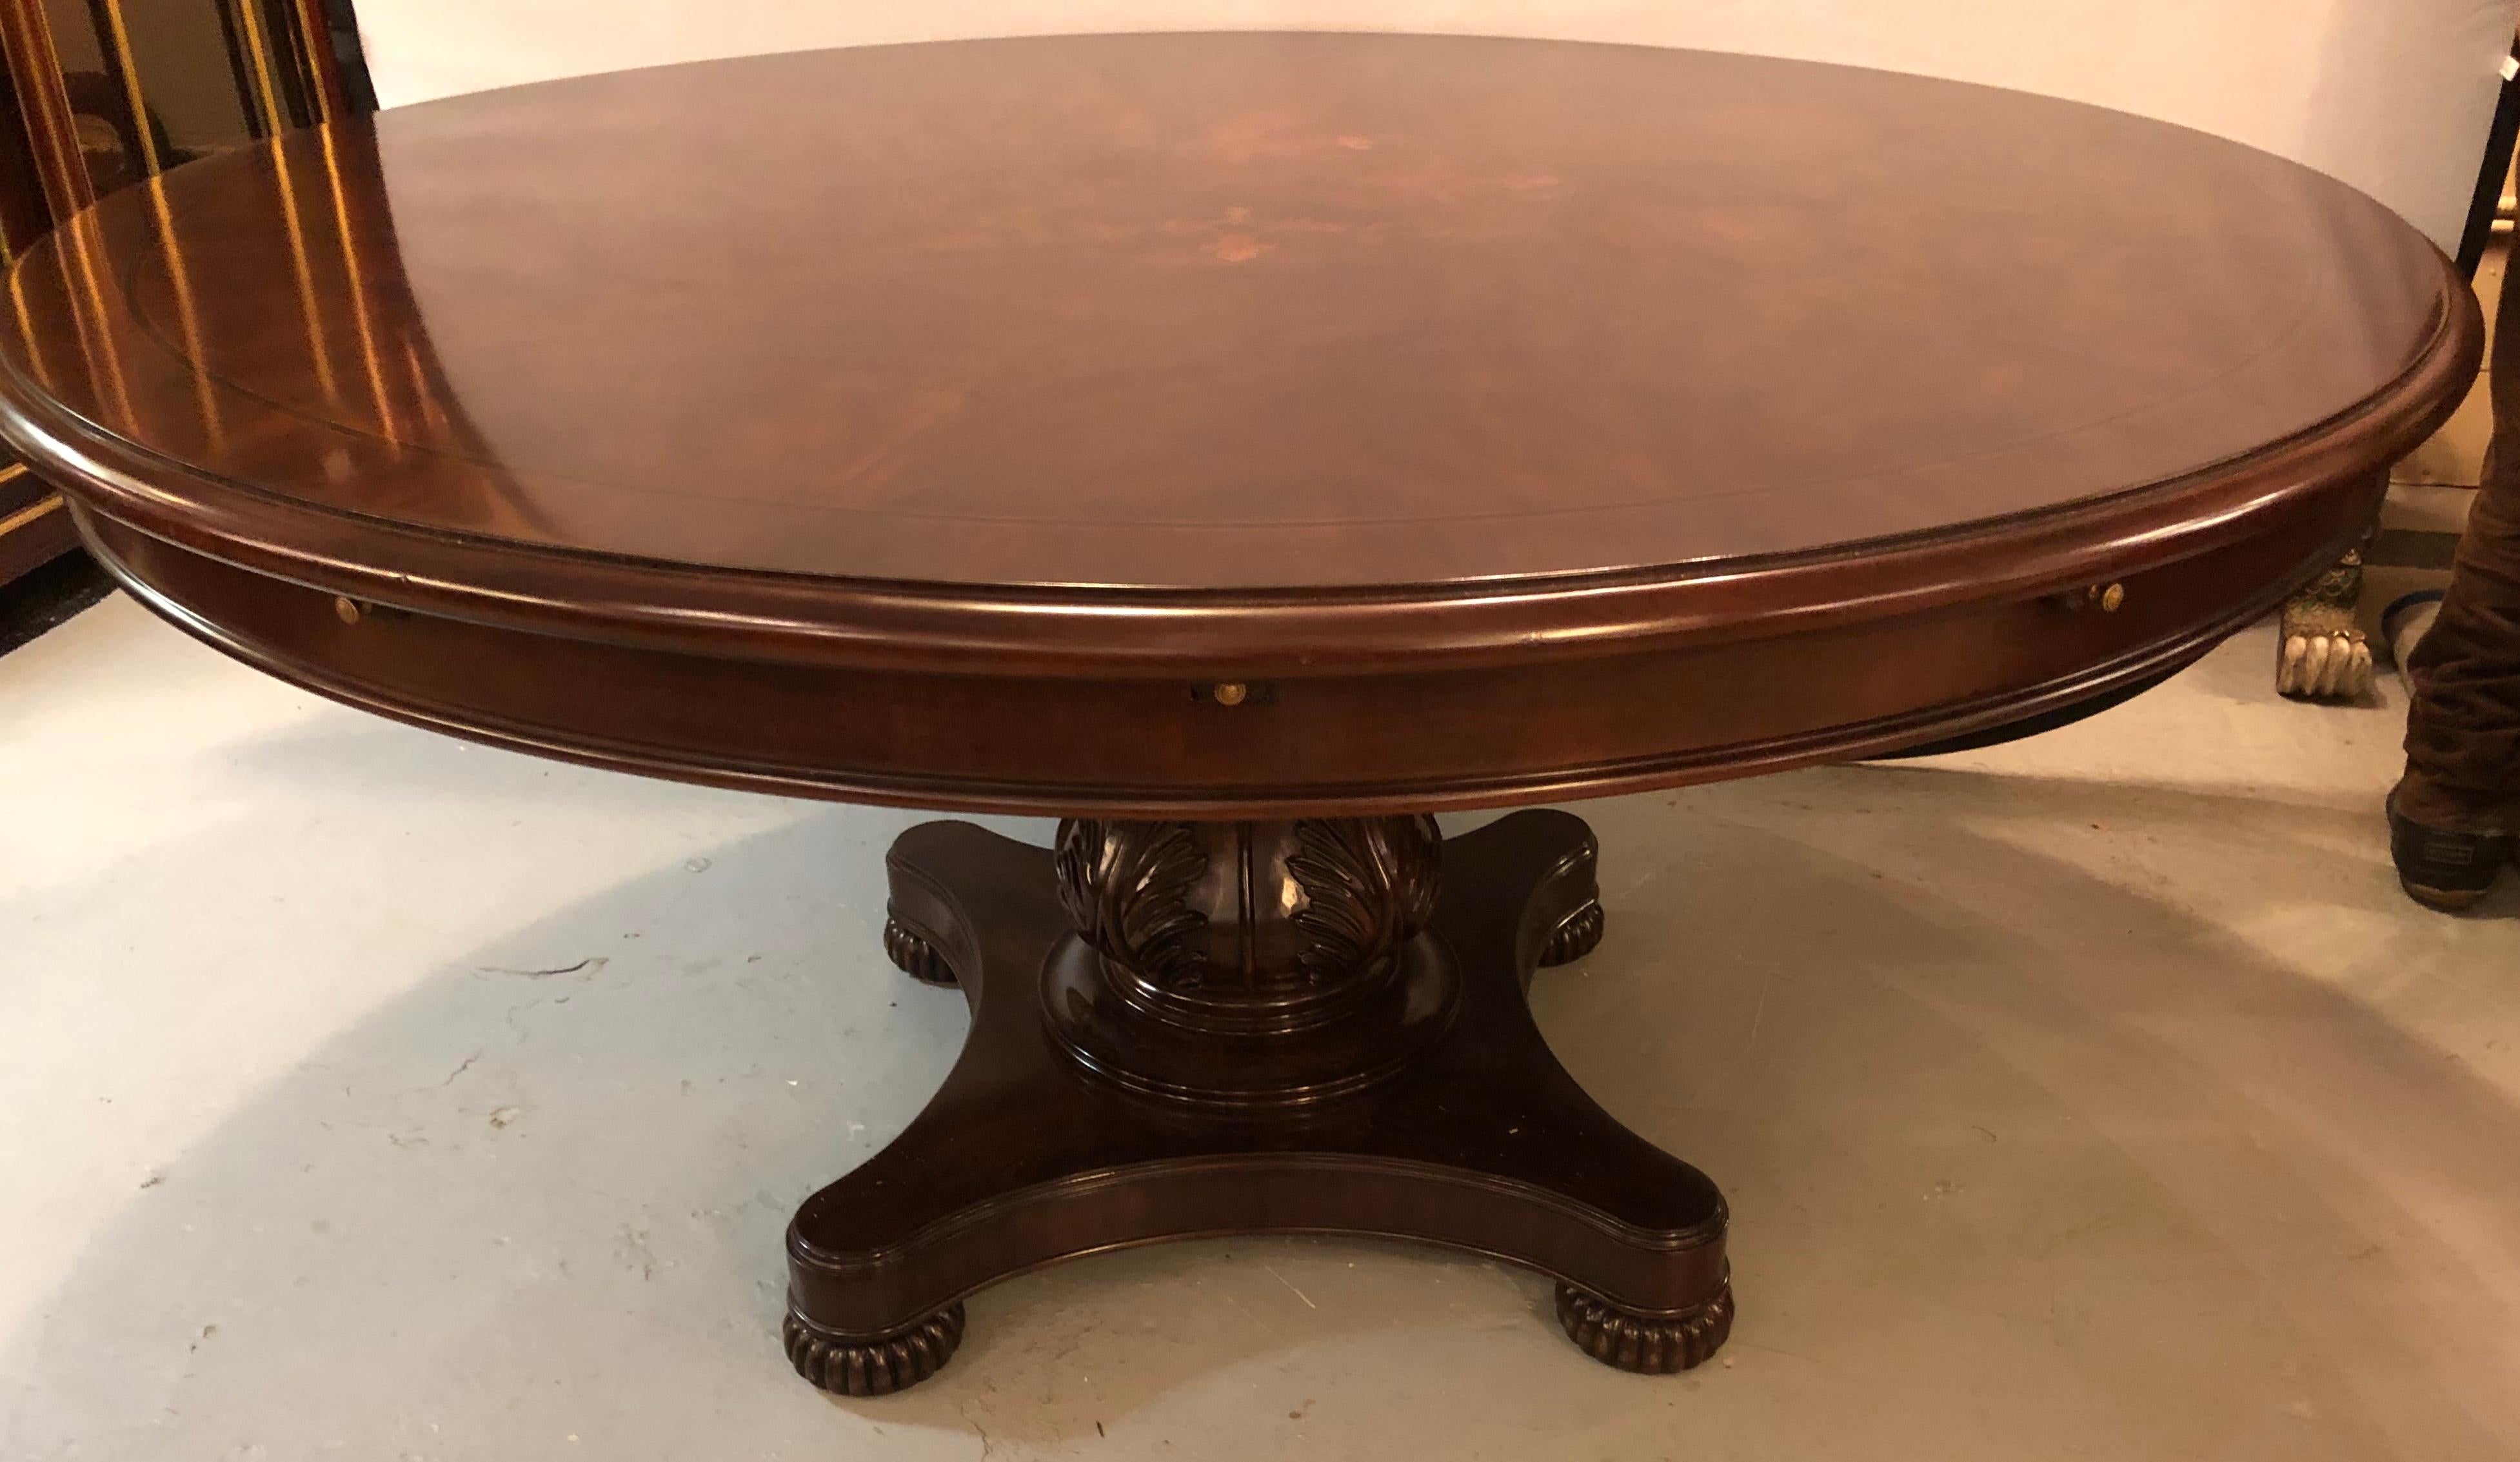 Georgian style circular expanding dining room table having an inlaid top. This finely inlaid and strong dining table sits on a leaf carved pedestal base which supports a round dining table that will expand to an even large round. The center of the